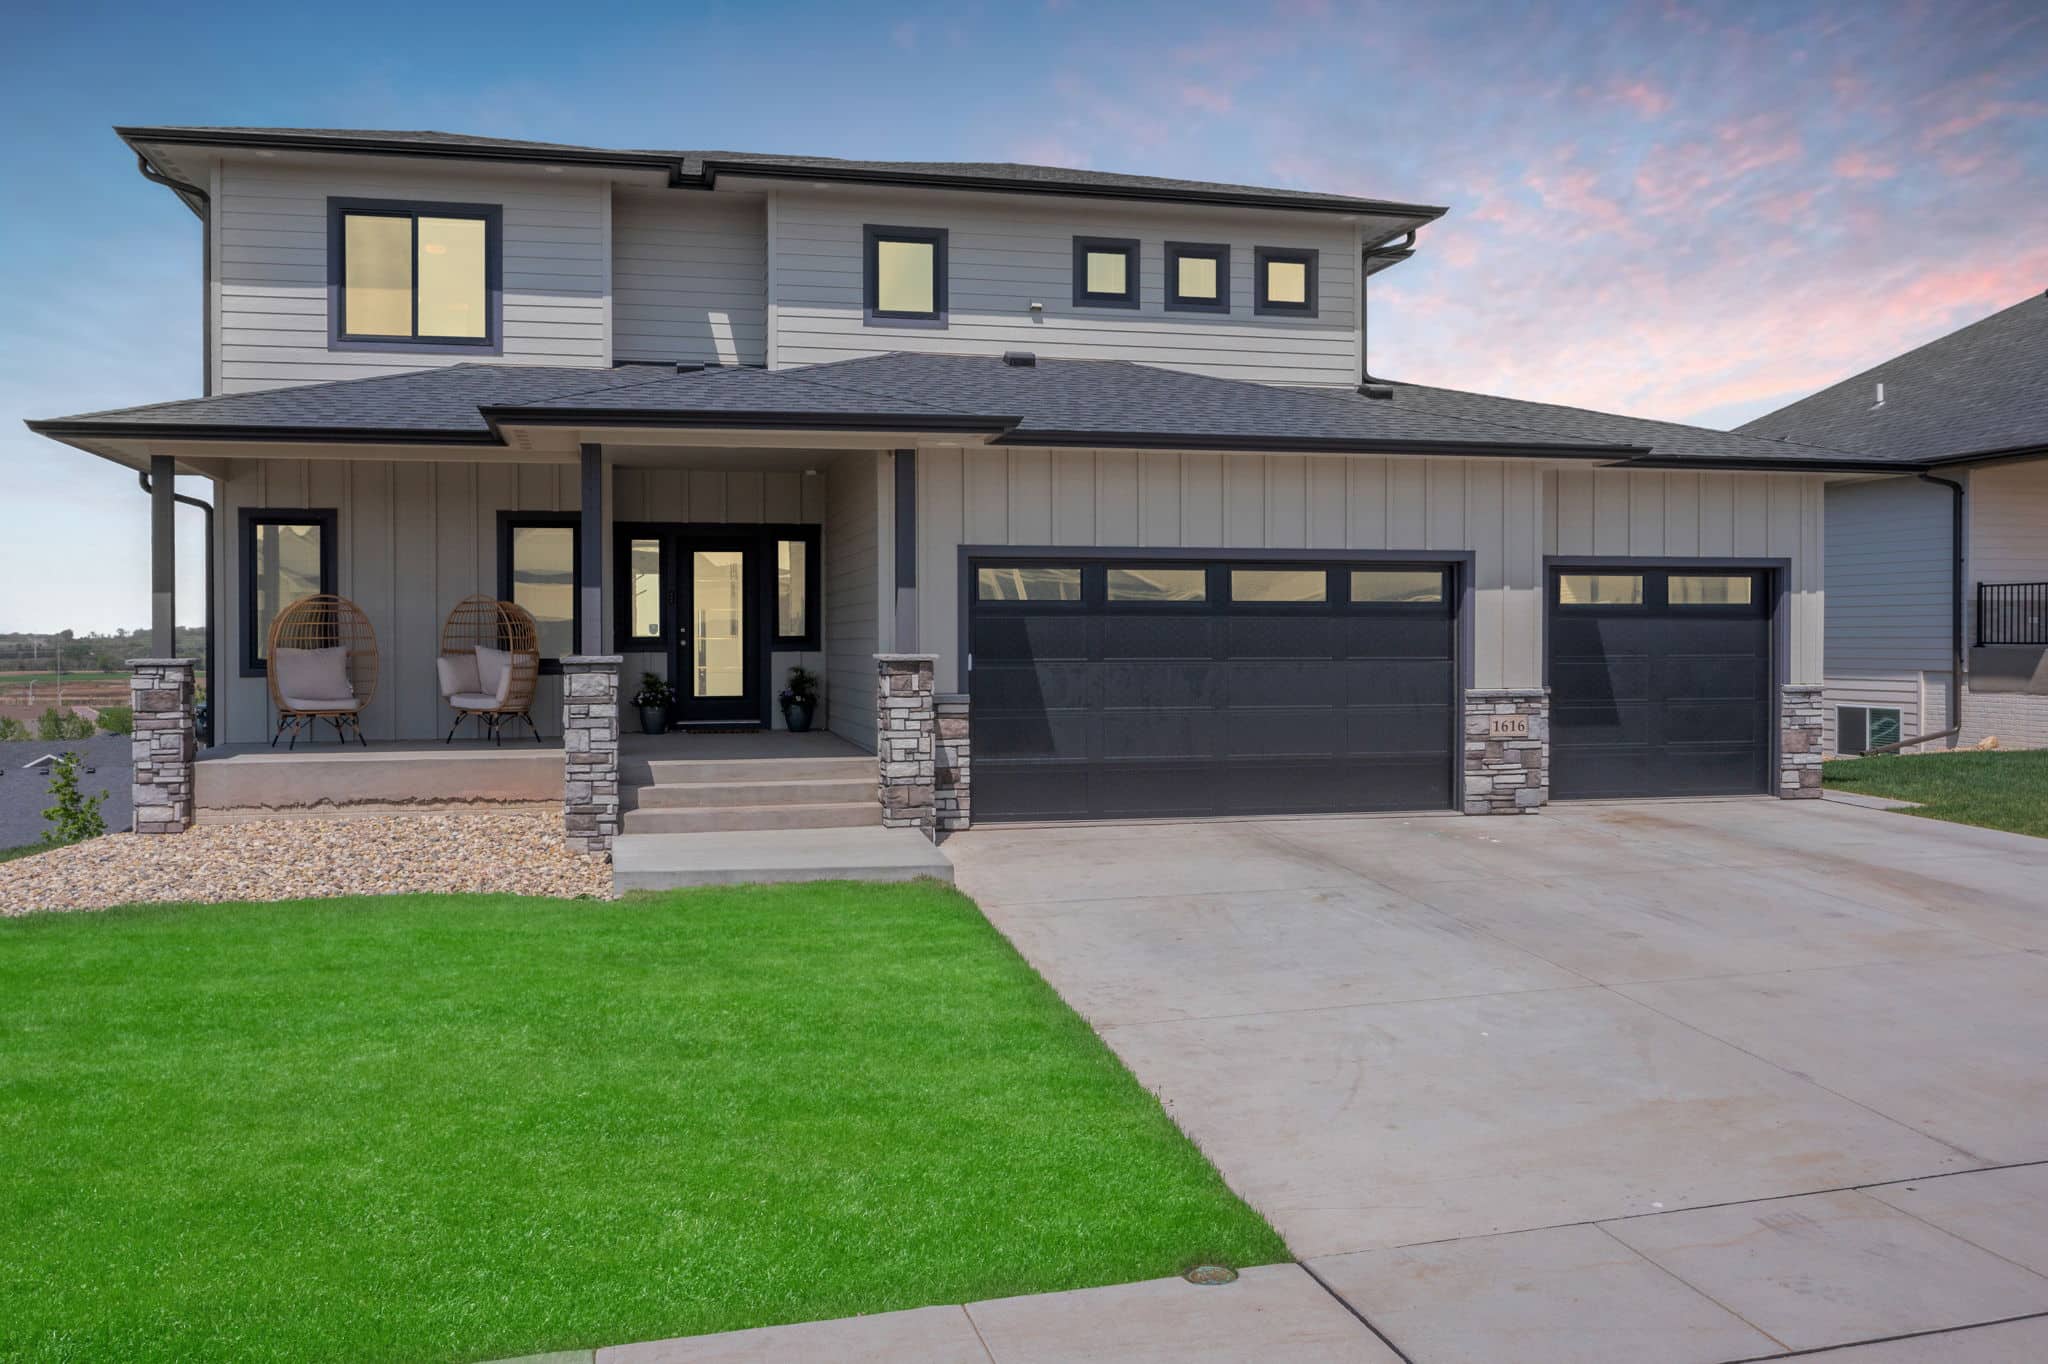 Like-new home in sought-after Brandon neighborhood filled with upgrades